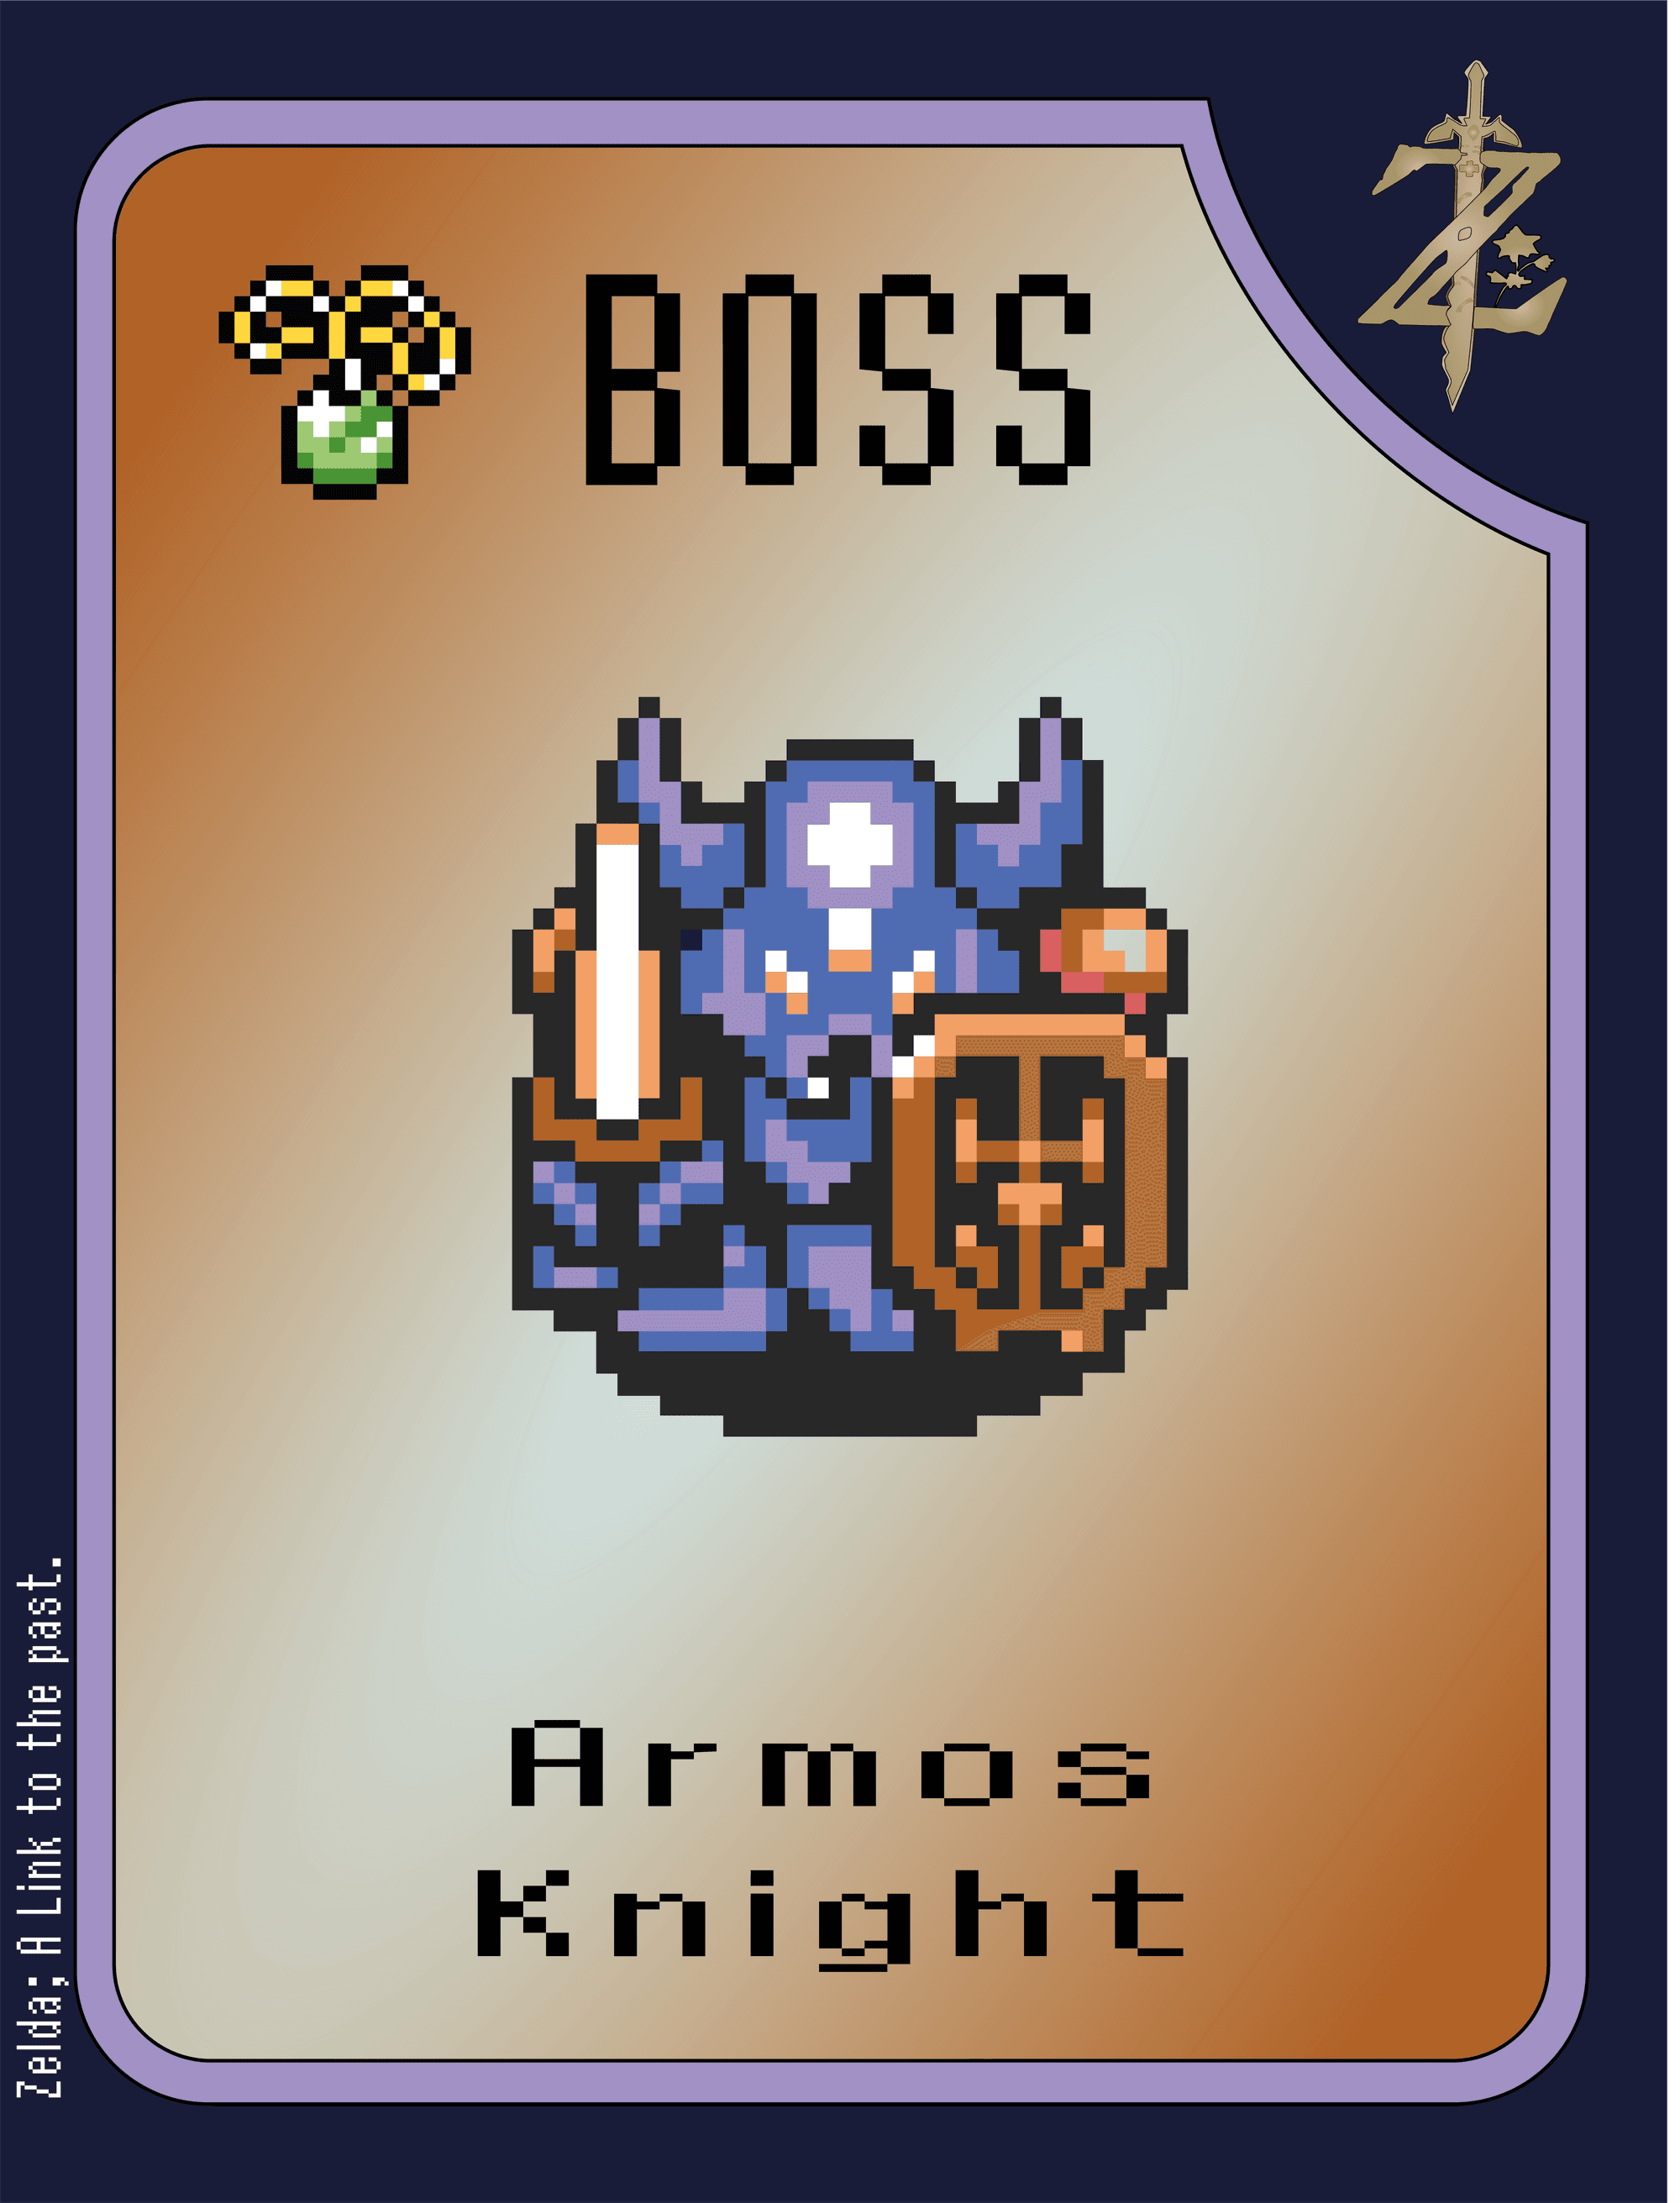 Bosses In A Link To The Past Zelda Wiki - Link To The Past Art